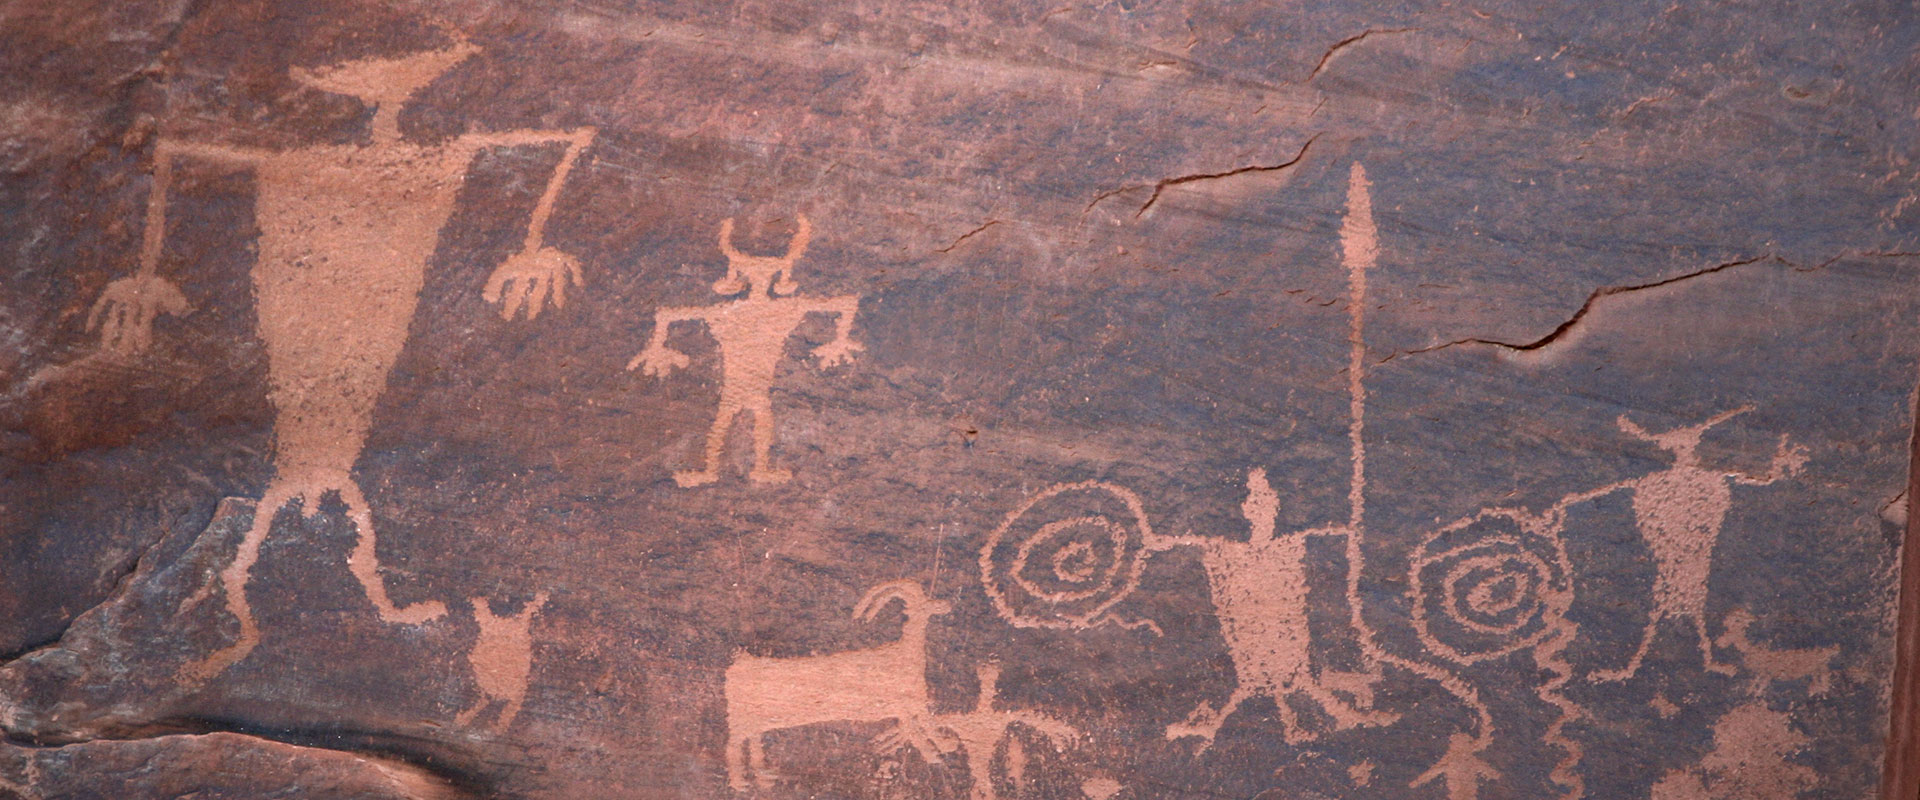 the rock drawings